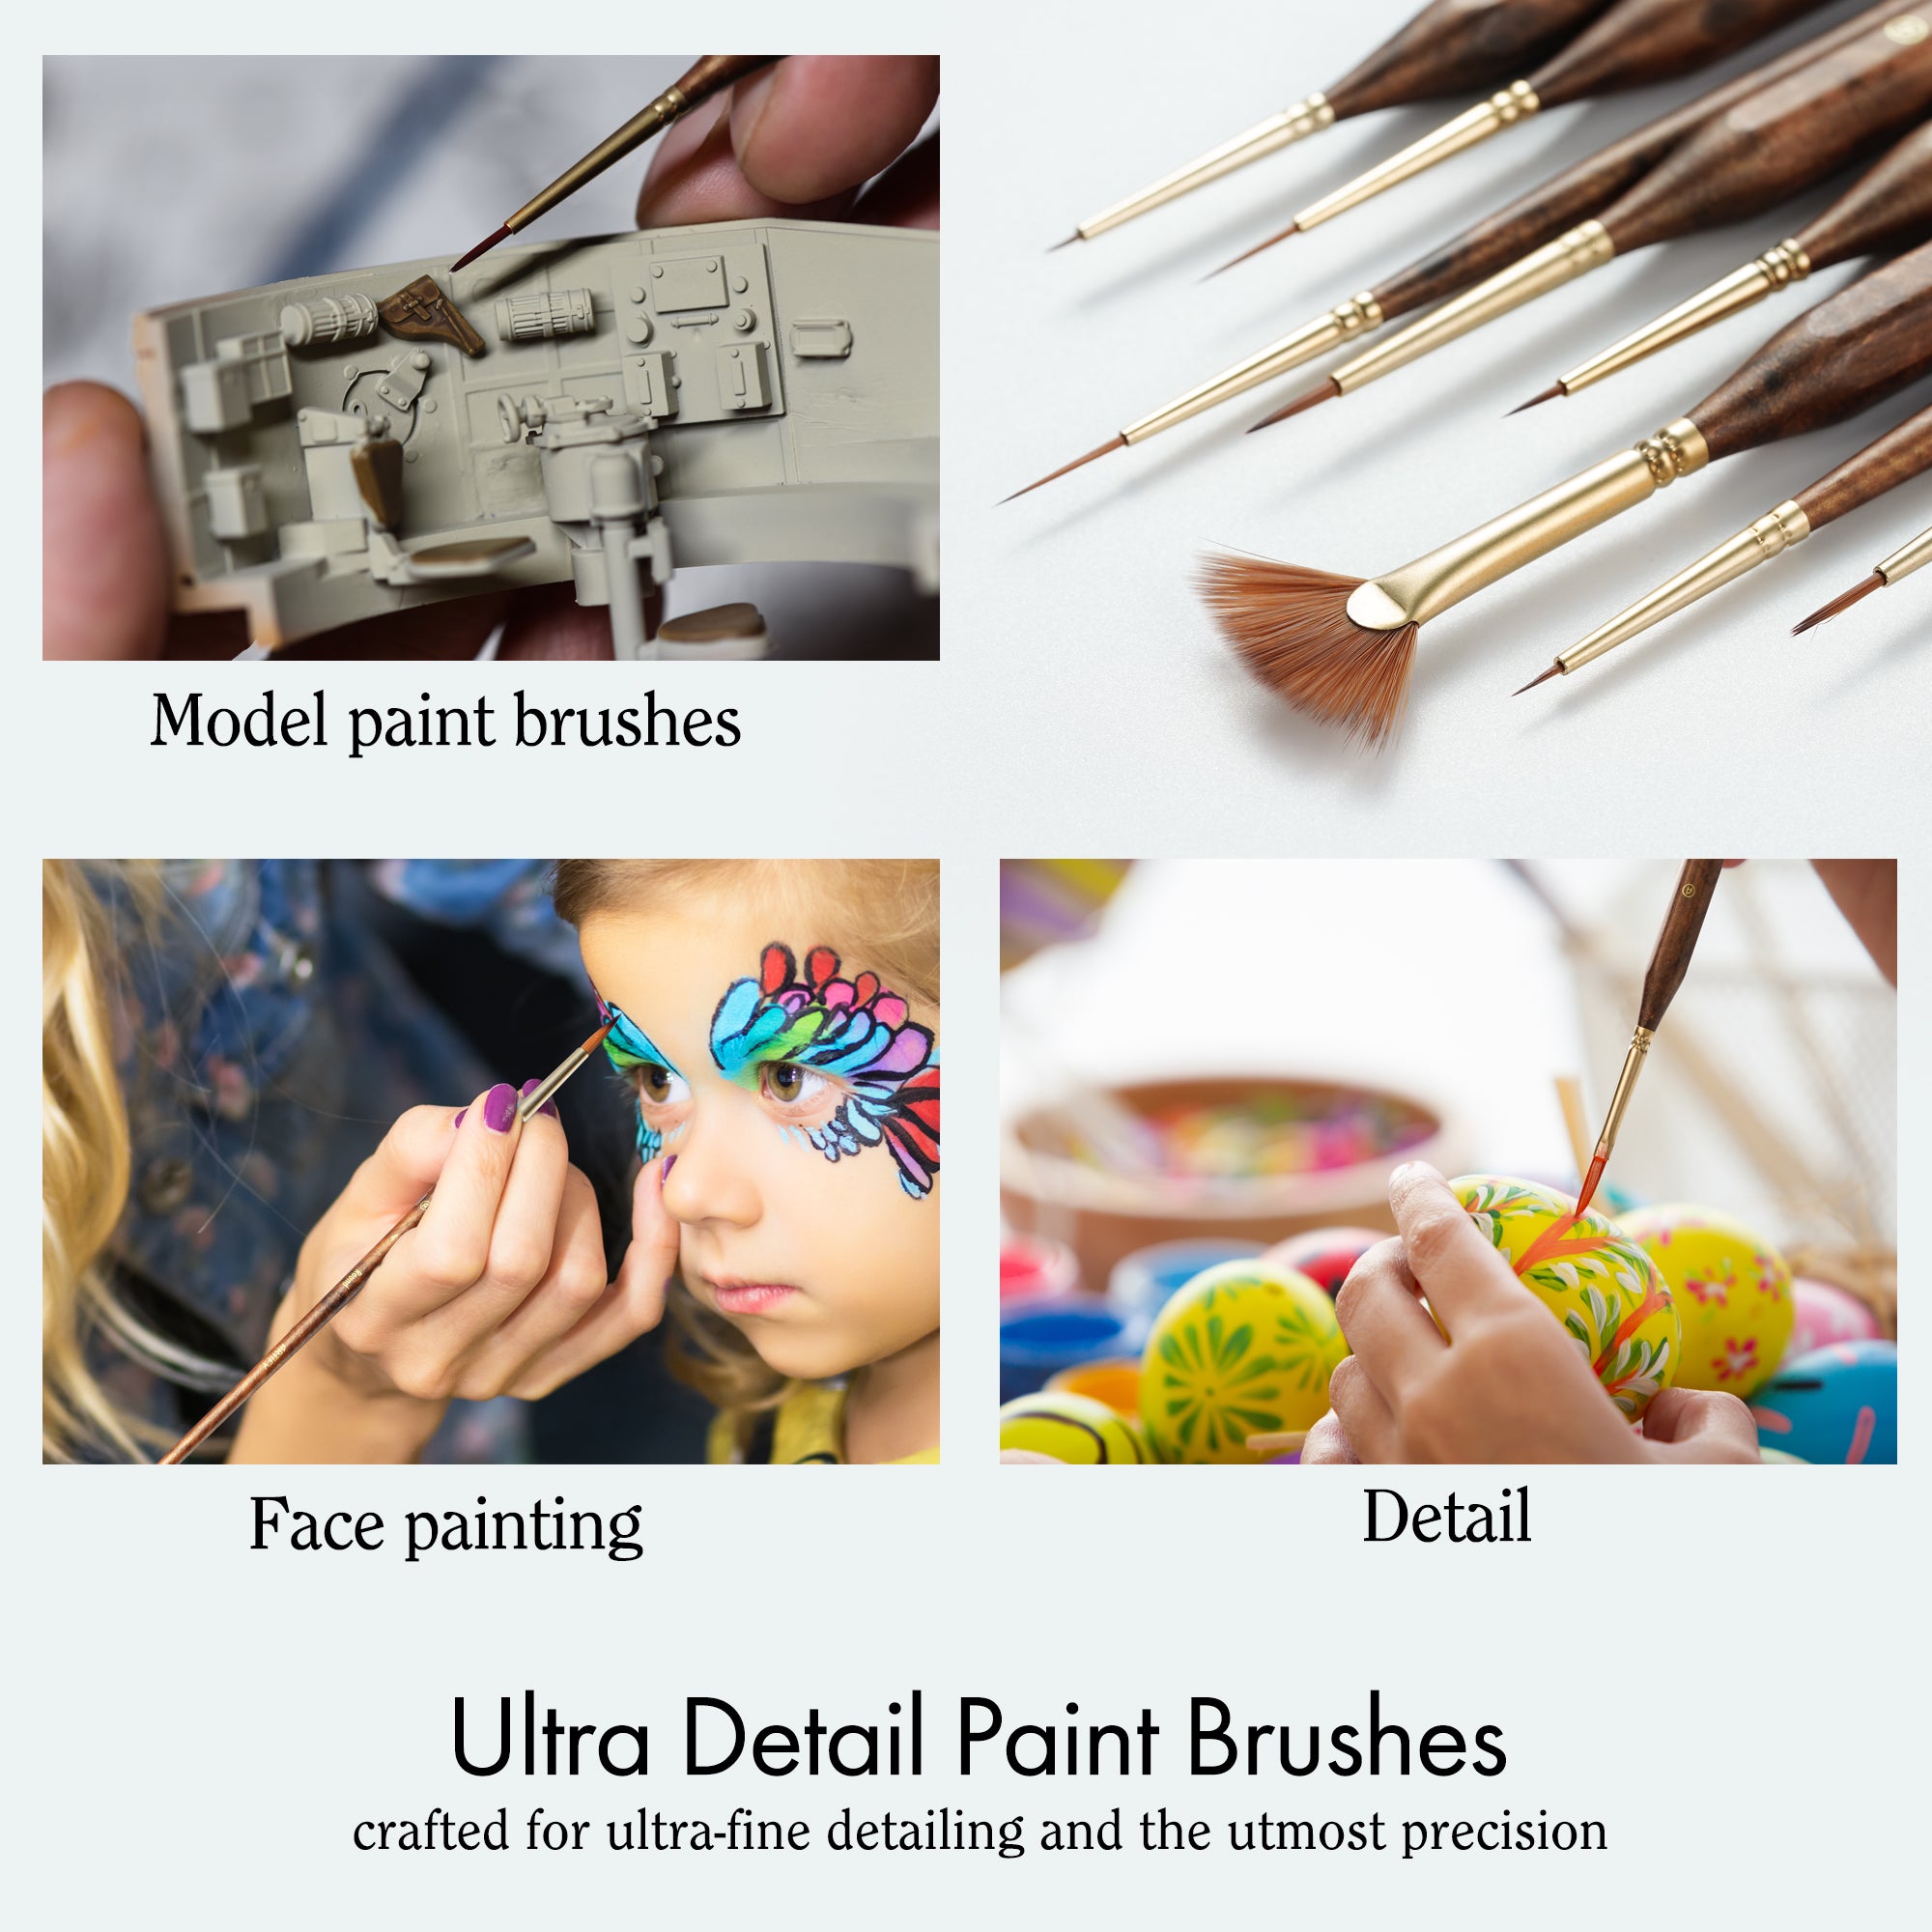 20PCS  Ultra Detail Paint Brushes Crafted For Ultra-fine Detailing And The Utmost Precision